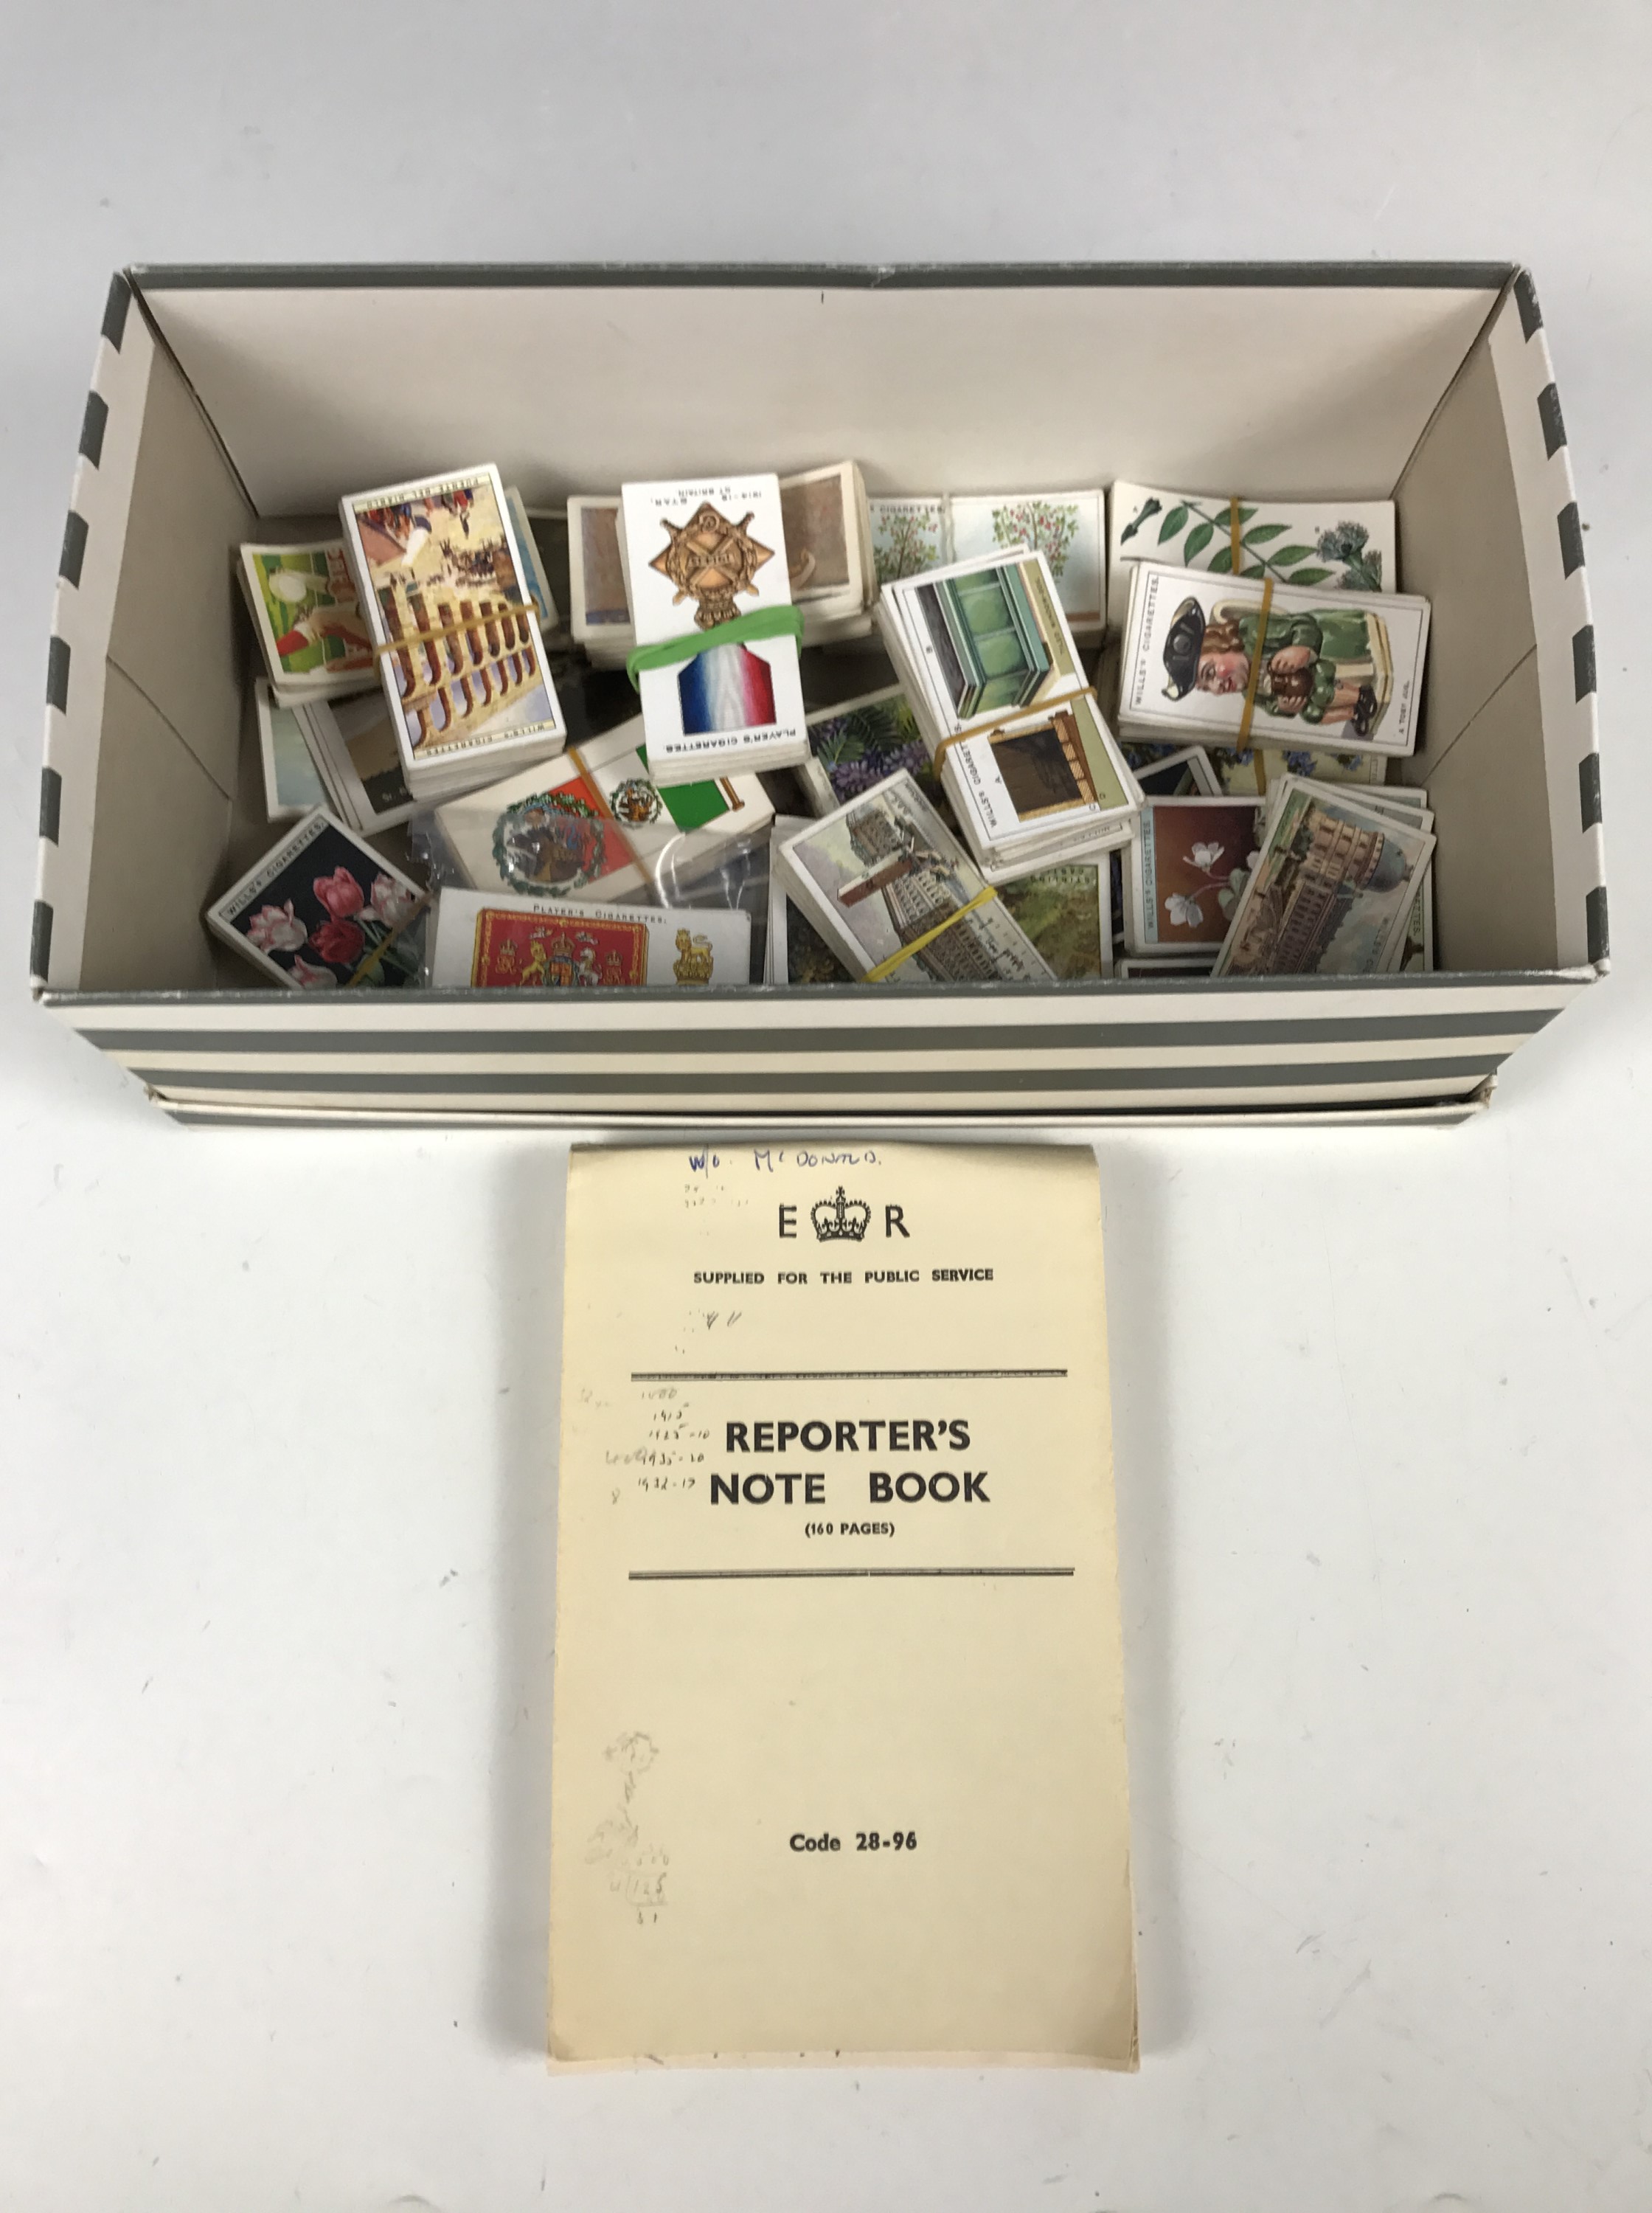 A collection of vintage Wills and Players cigarette cards, including War Decorations and Medals